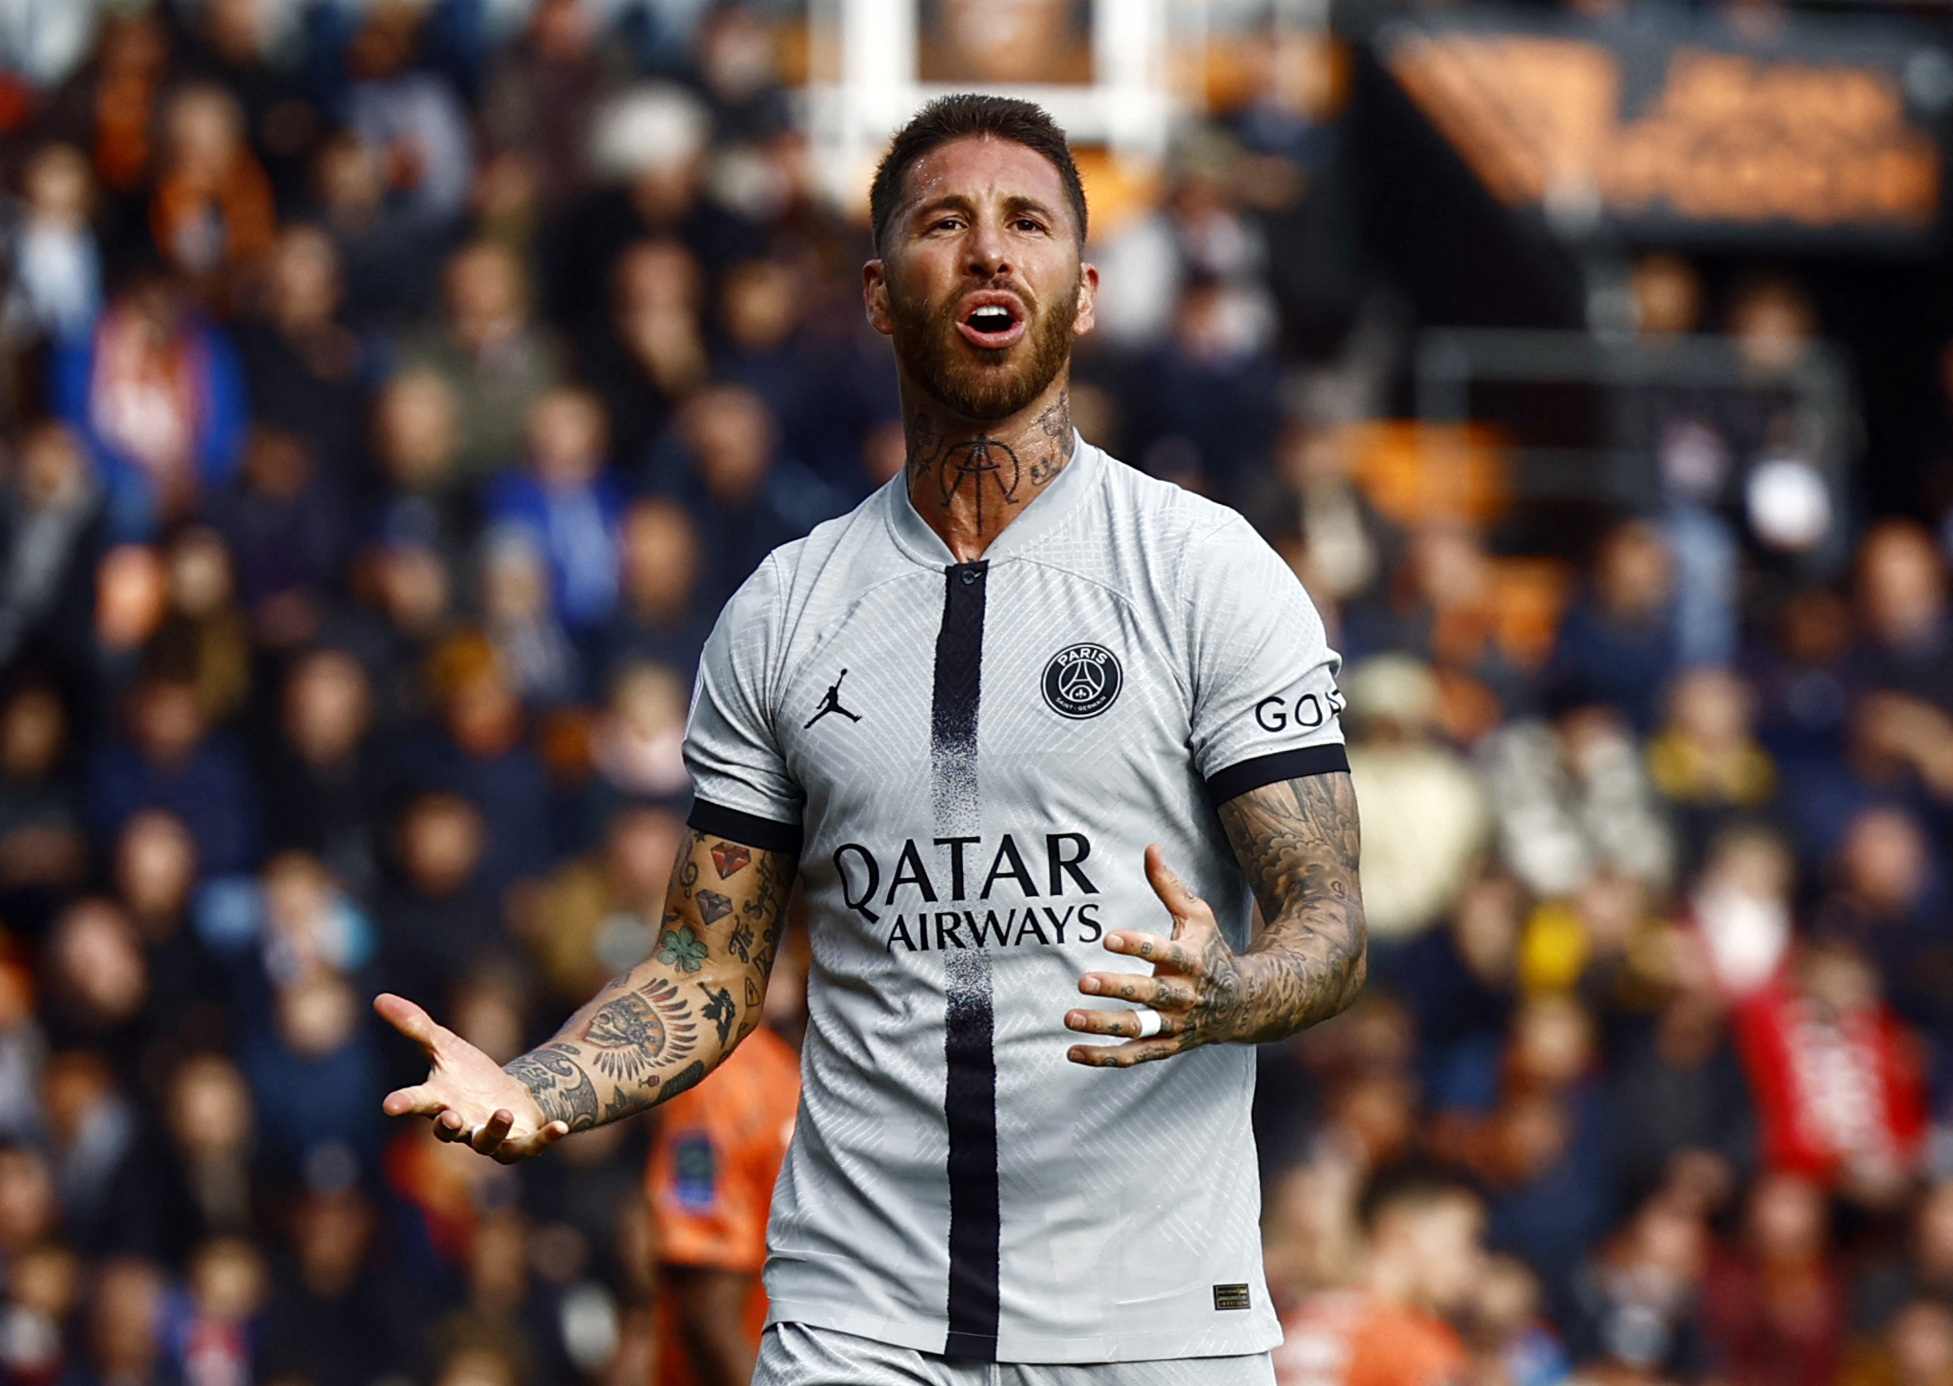 Spain's Ramos disappointed by World Cup omission